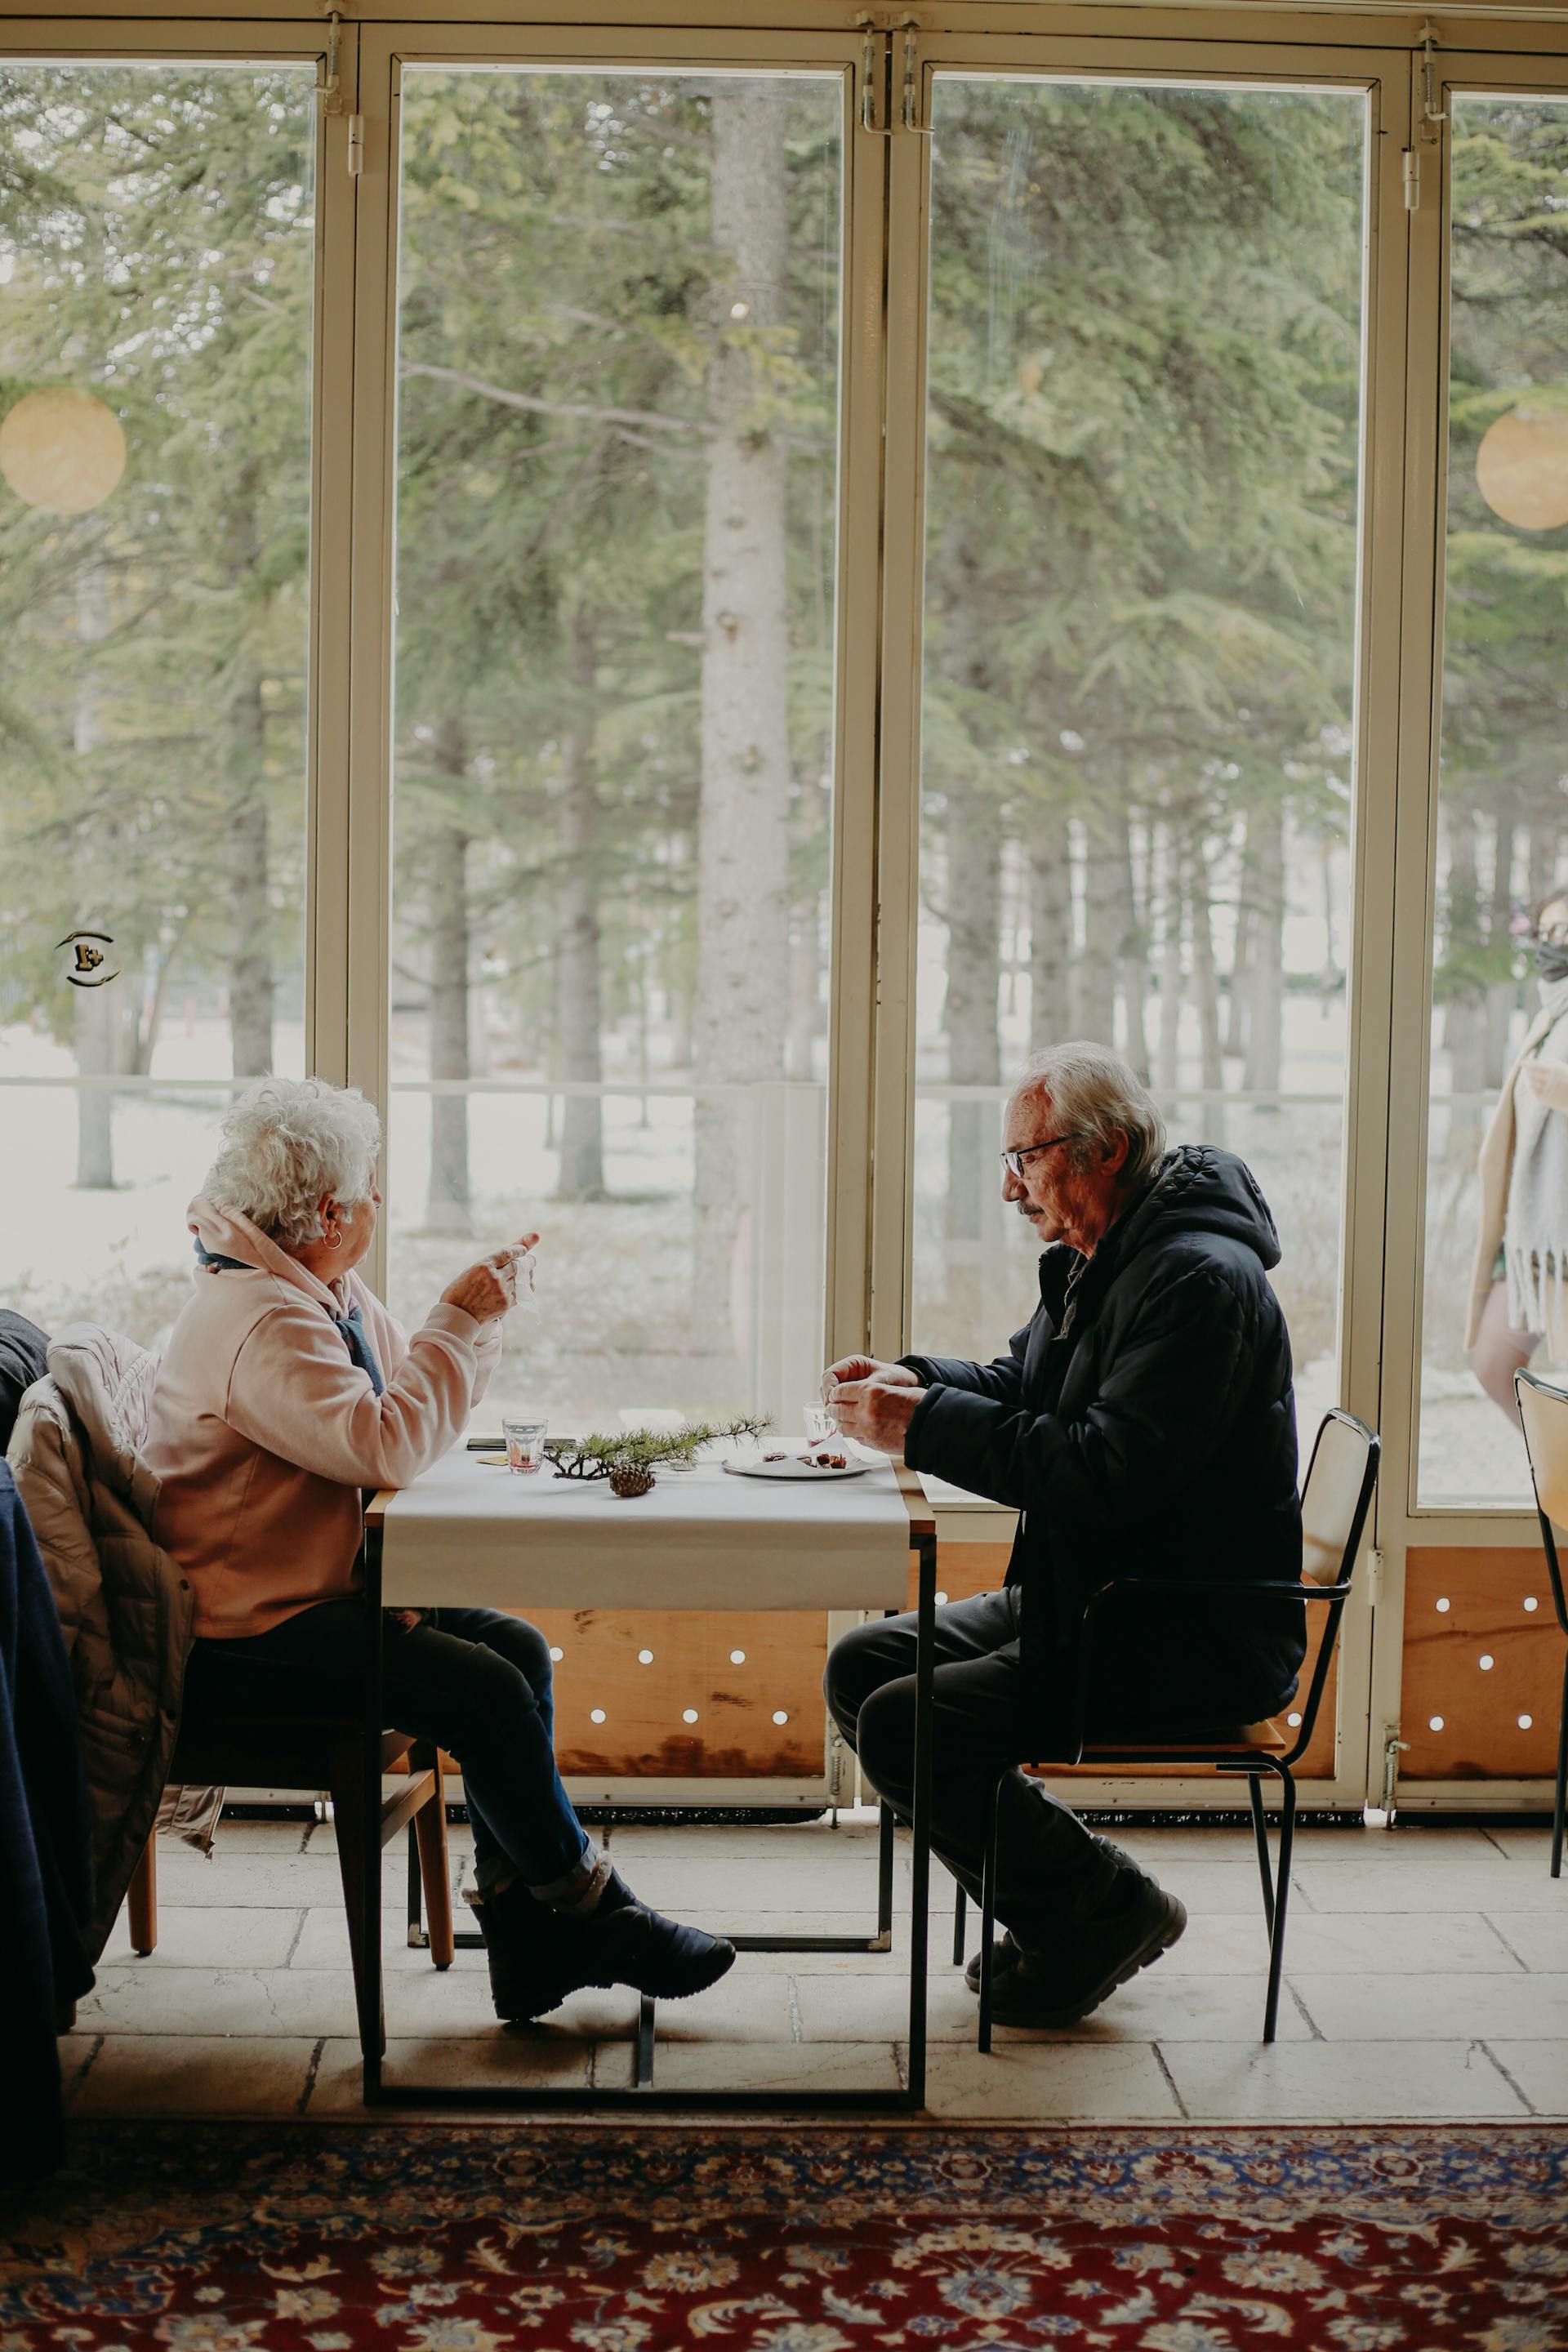 An older couple eating in a restaurant | Source: Pexels